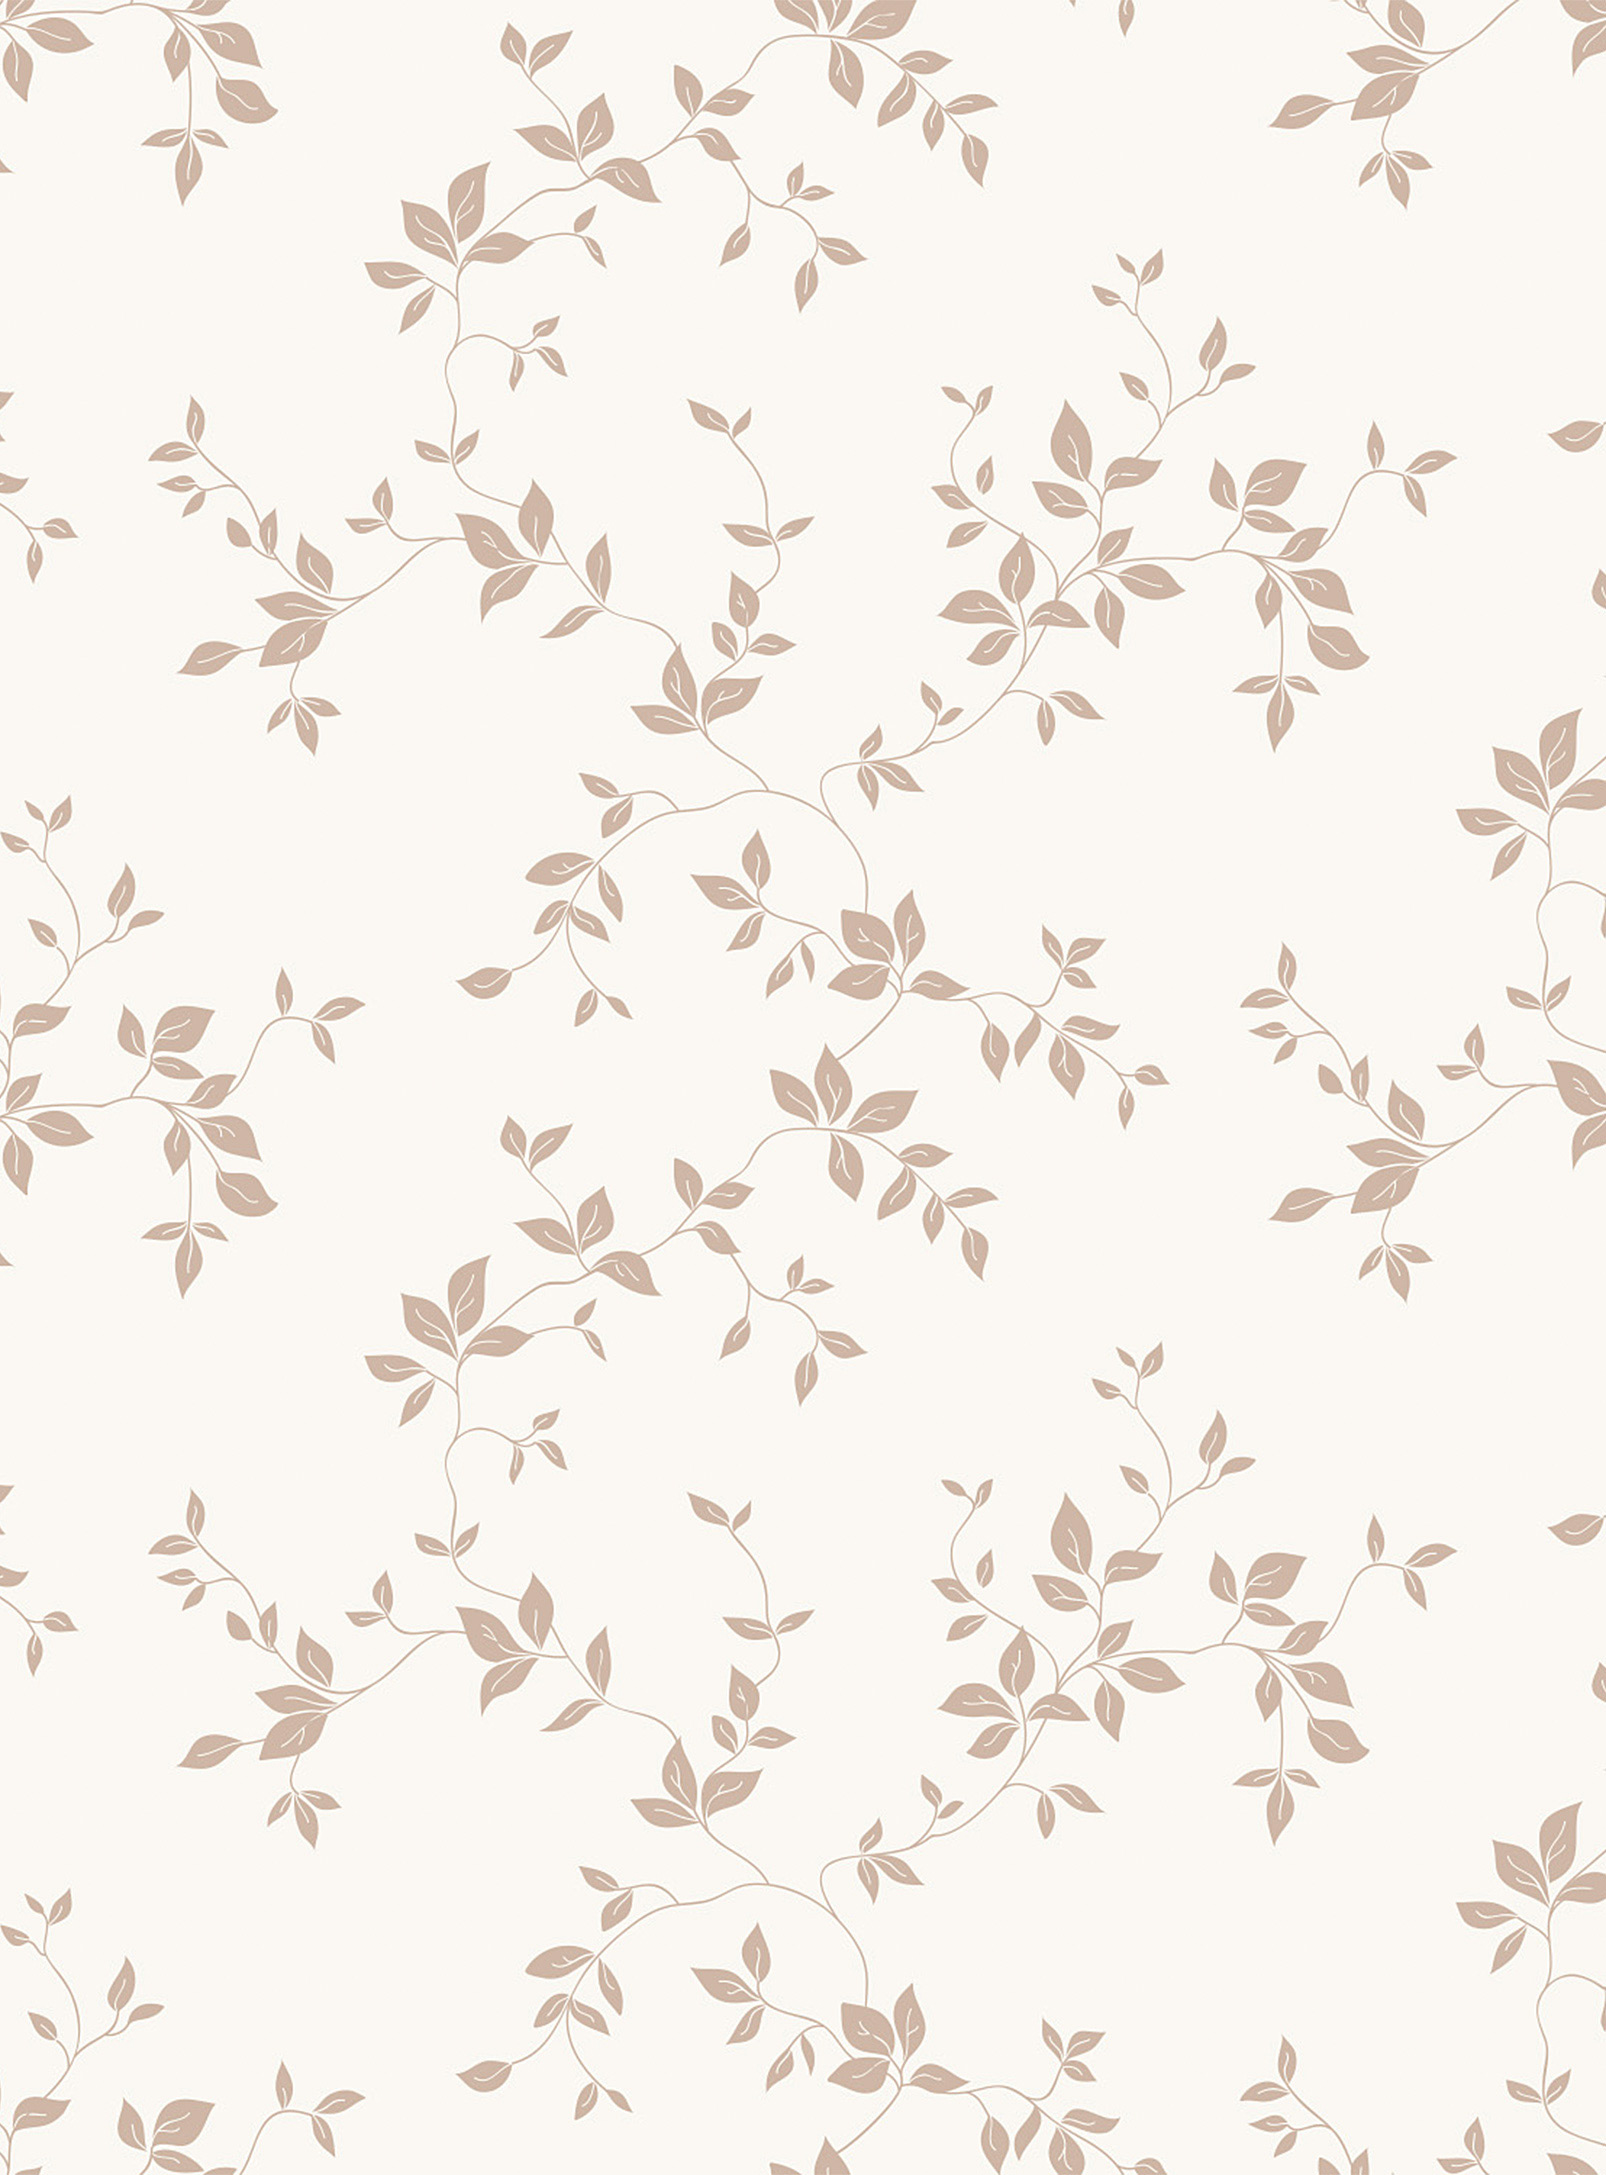 Station D Rosane Flowery Wallpaper Strip See Available Sizes In Light Brown